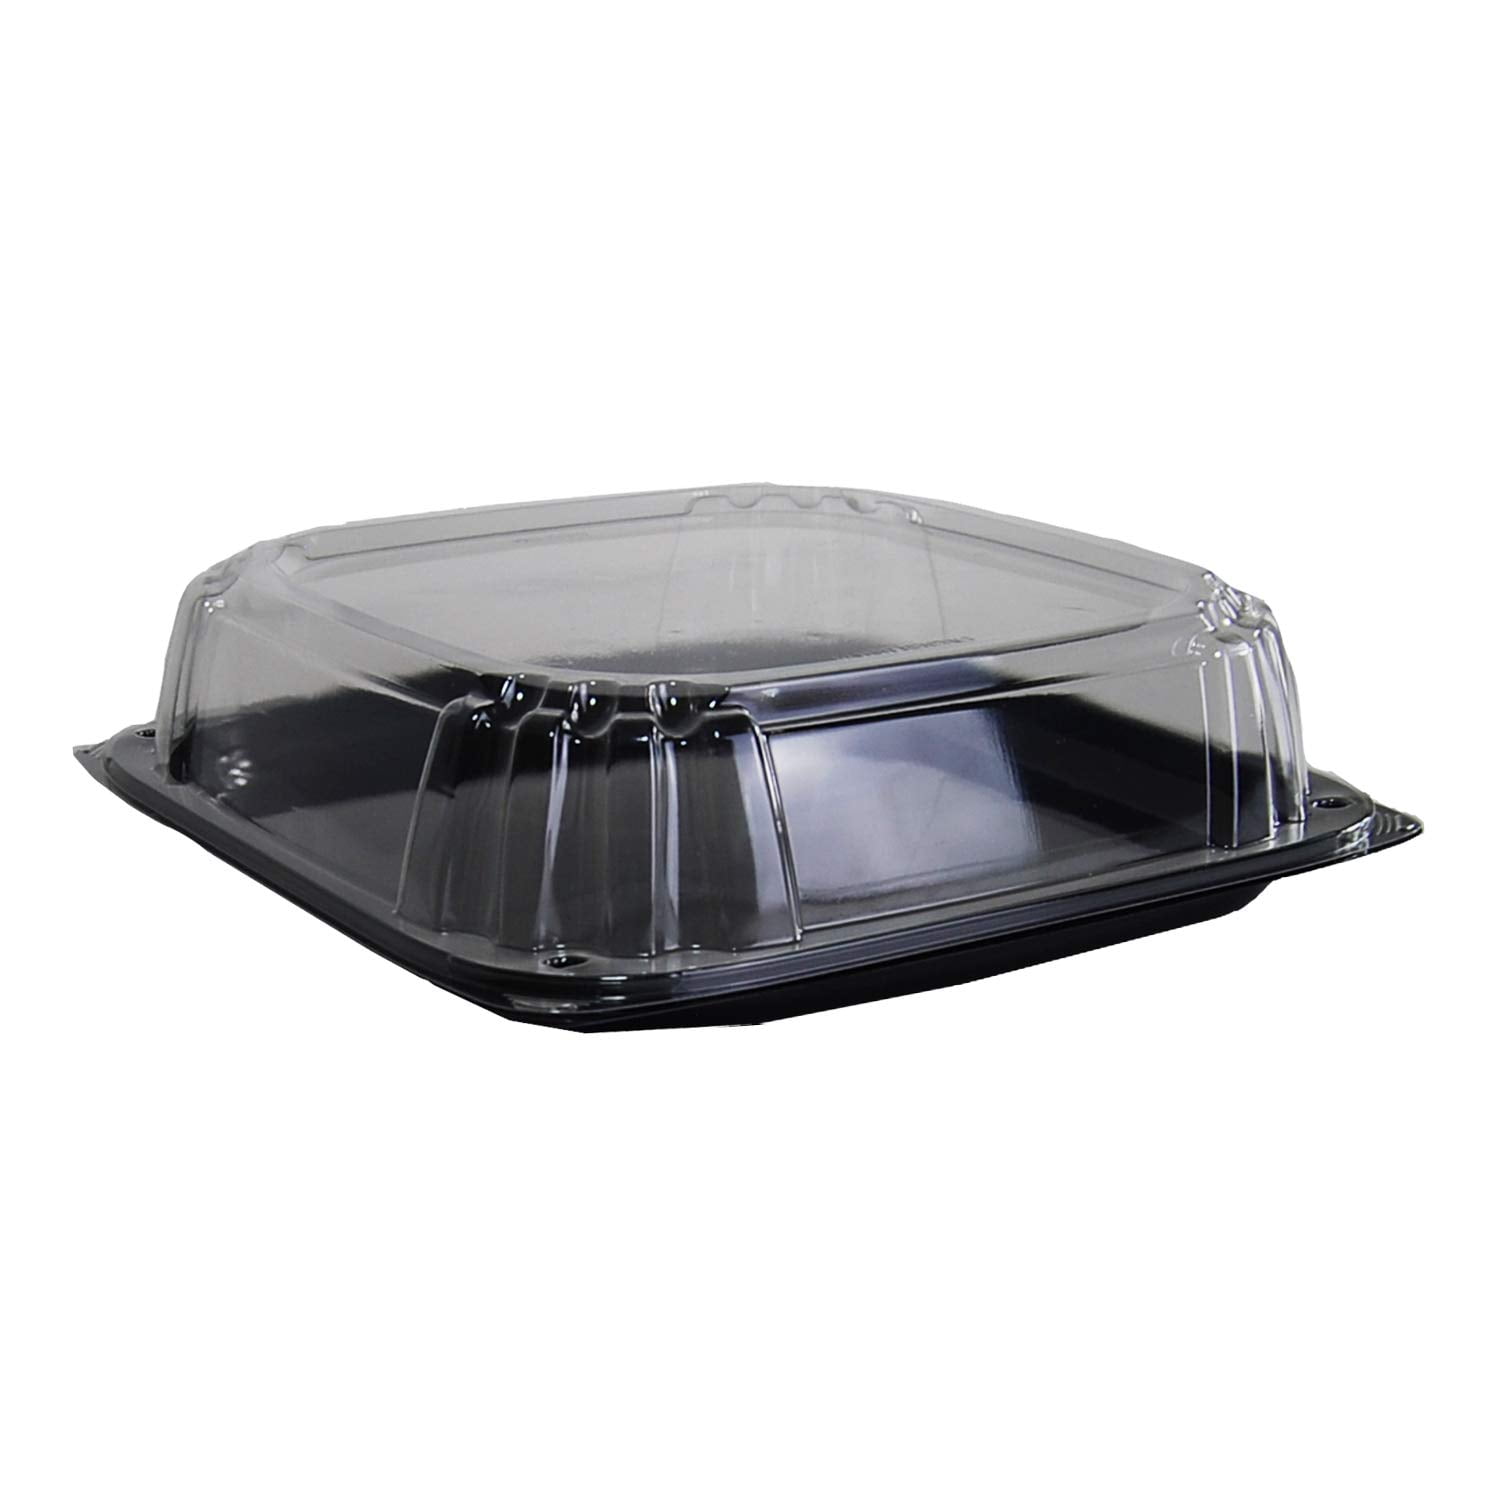 extra Large MARBLE EFFECToblong platter and lid  Large Buffet tray black  base clear lid from starlight packaging